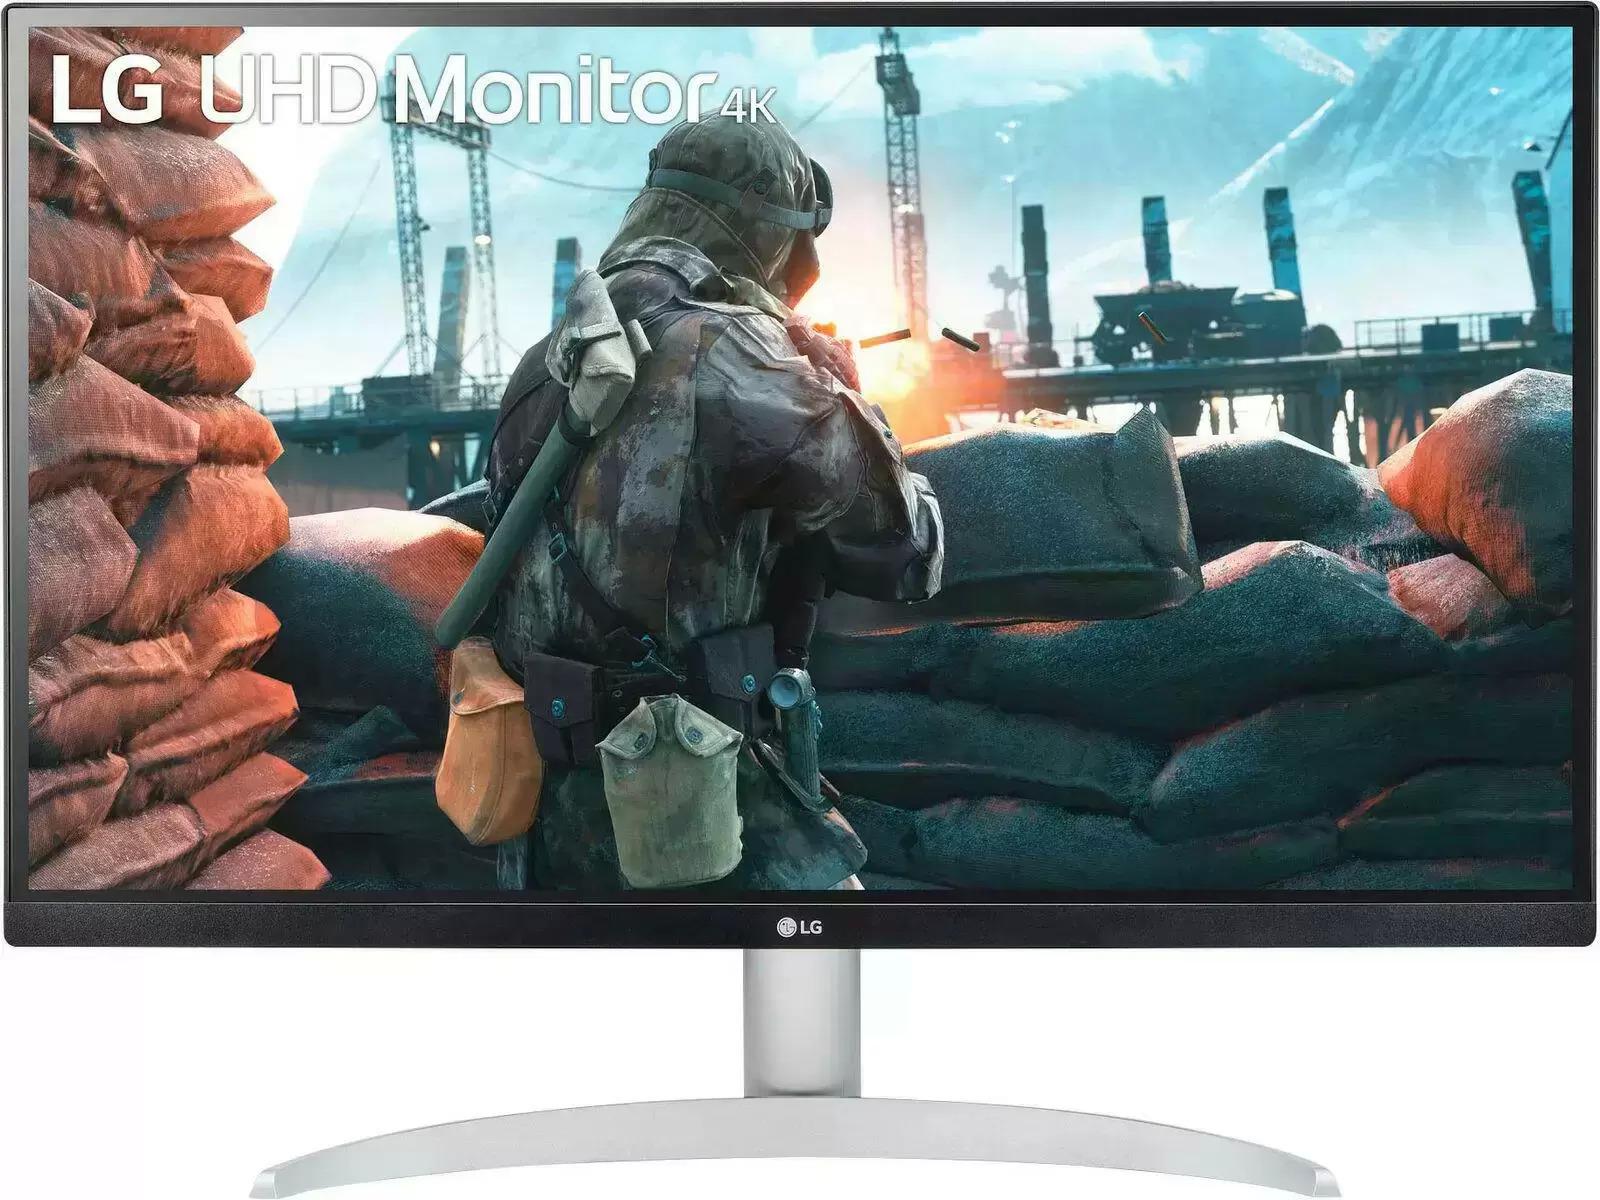 27in LG LED 4k UHD AMD Monitor with HDR for $199.99 Shipped